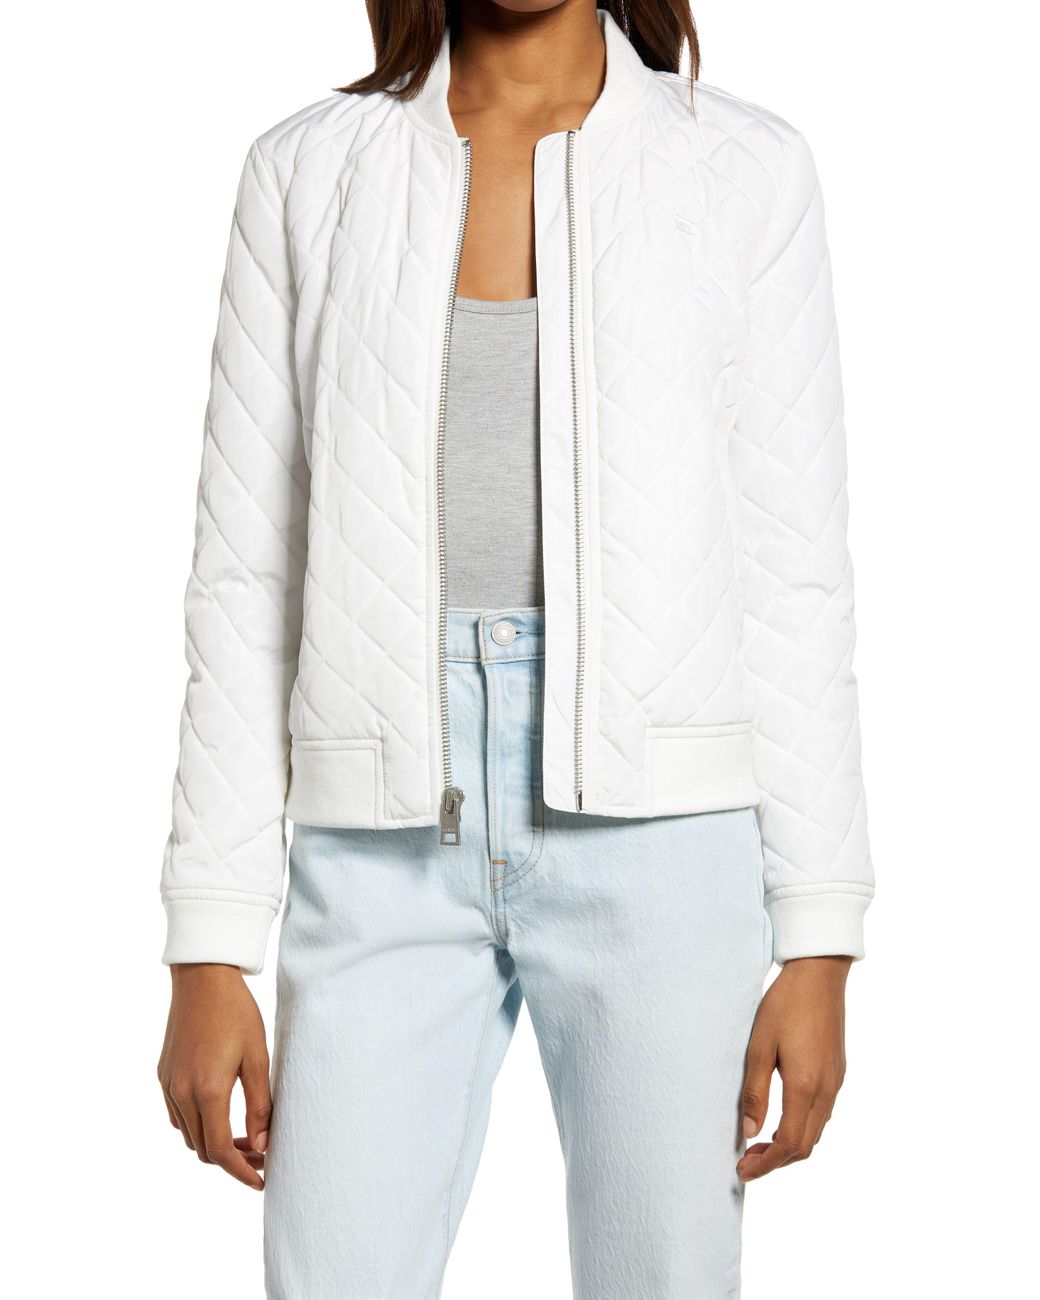 Levi's Quilted Bomber Jacket in White - Lyst